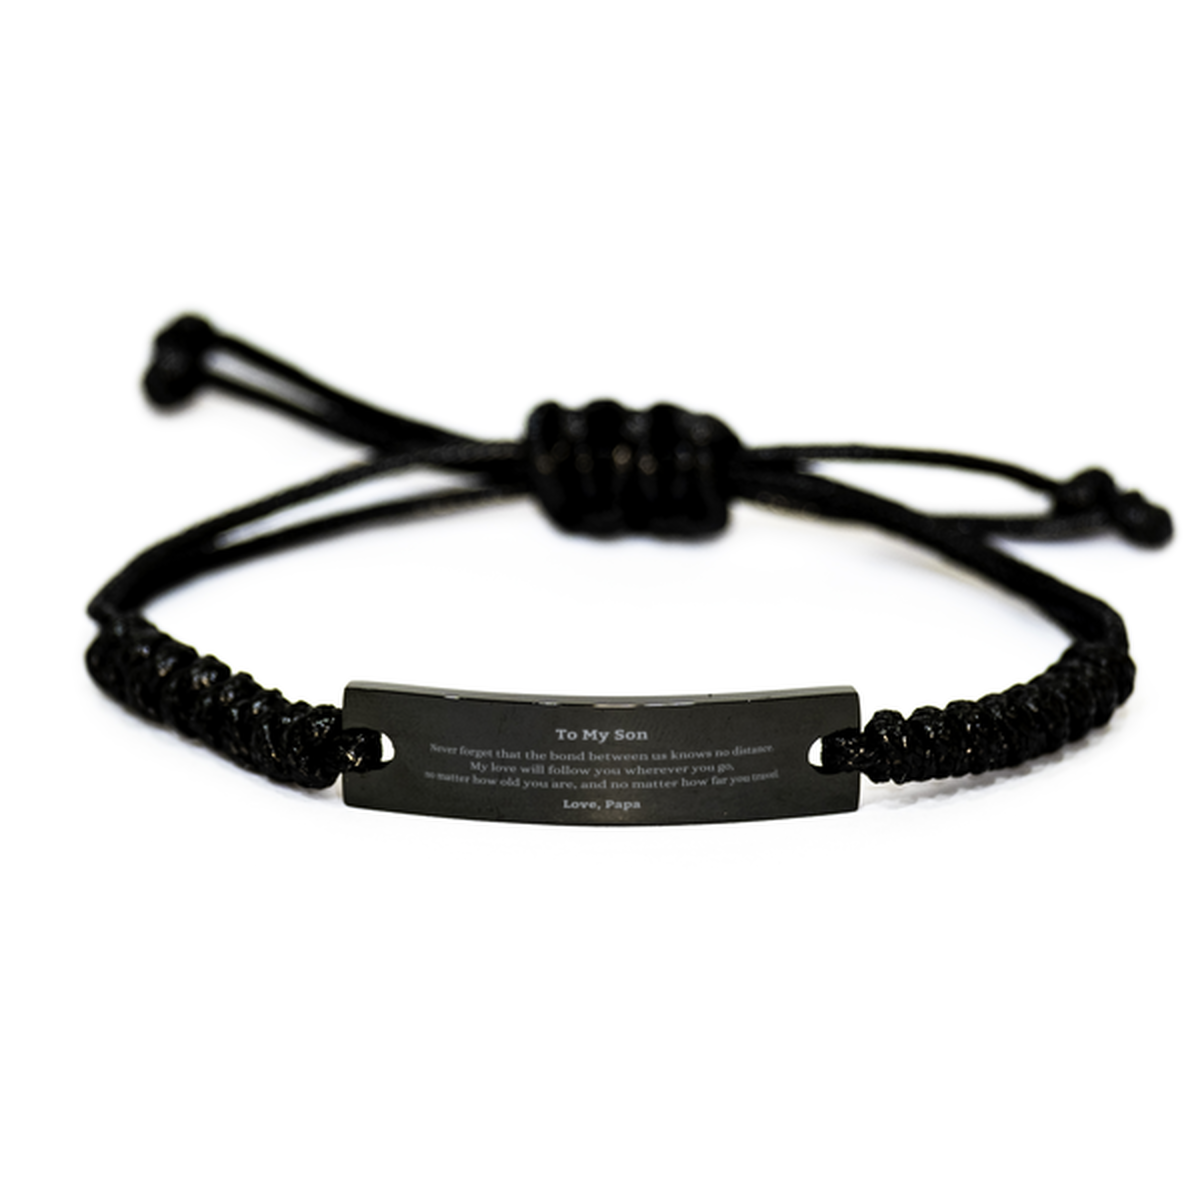 Son Birthday Gifts from Papa, Adjustable Black Rope Bracelet for Son Christmas Graduation Unique Gifts Son Never forget that the bond between us knows no distance. Love, Papa